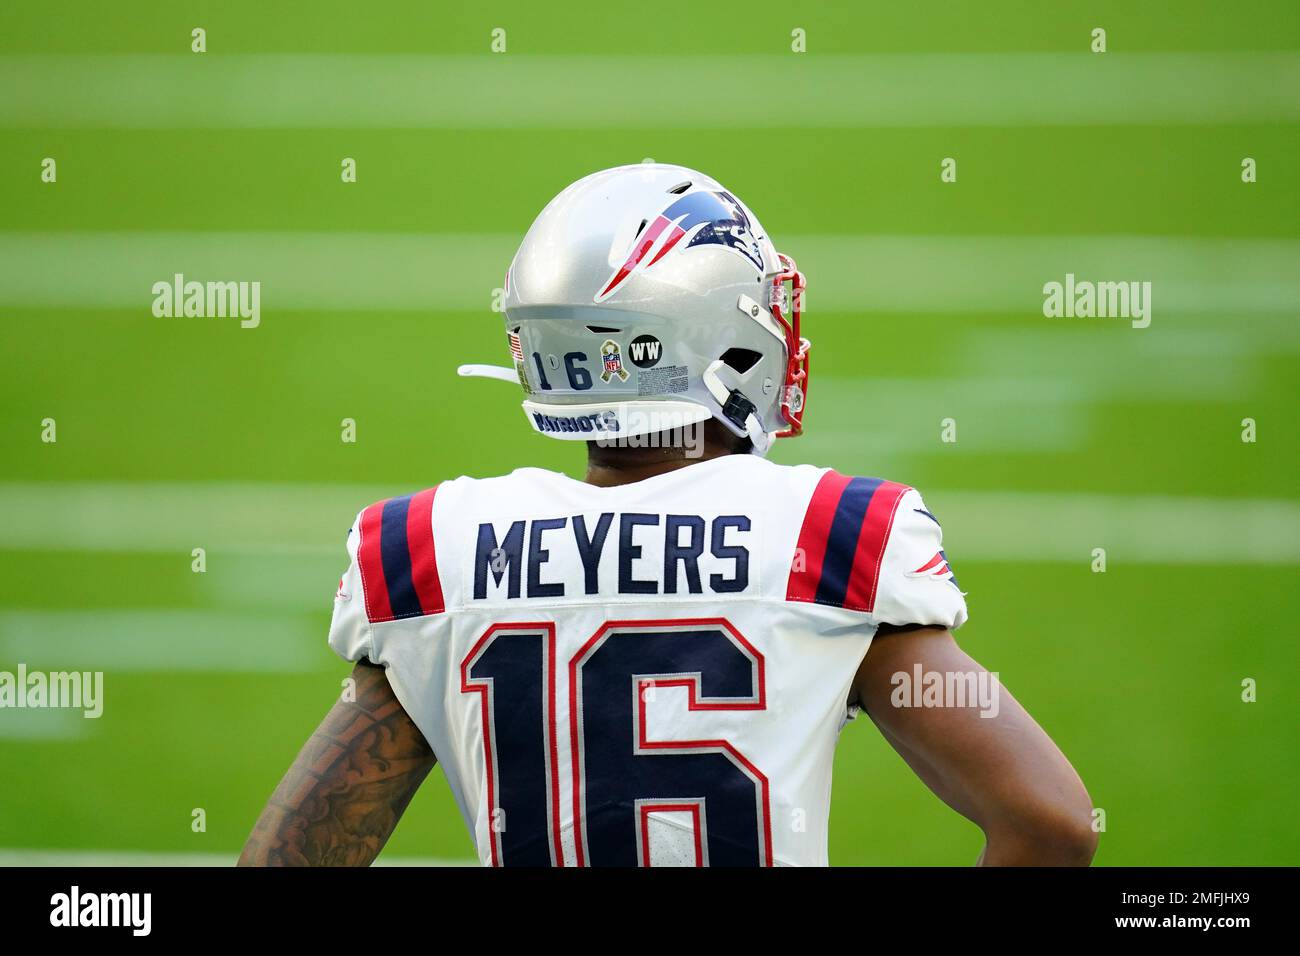 New England Patriots wide receiver Jakobi Meyers (16) is seen from